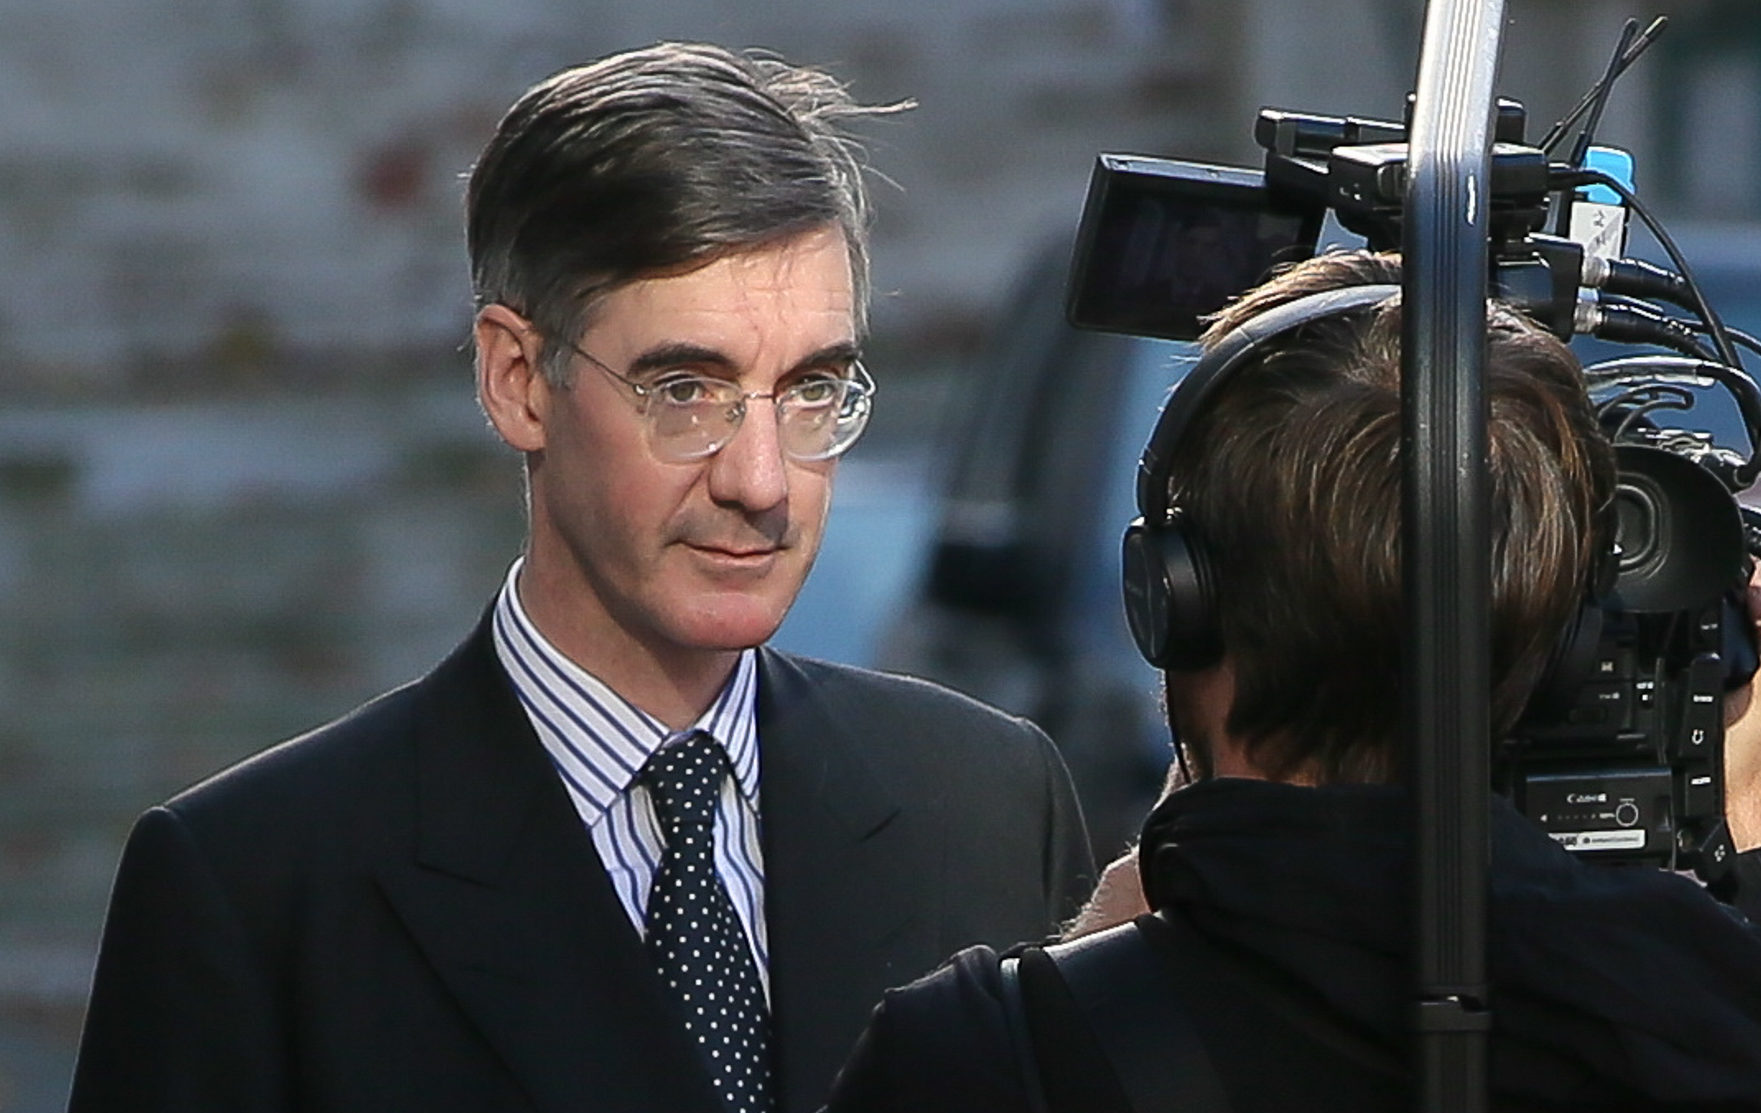 Jacob Rees-Mogg (Ian Lawrence X/Getty Images)